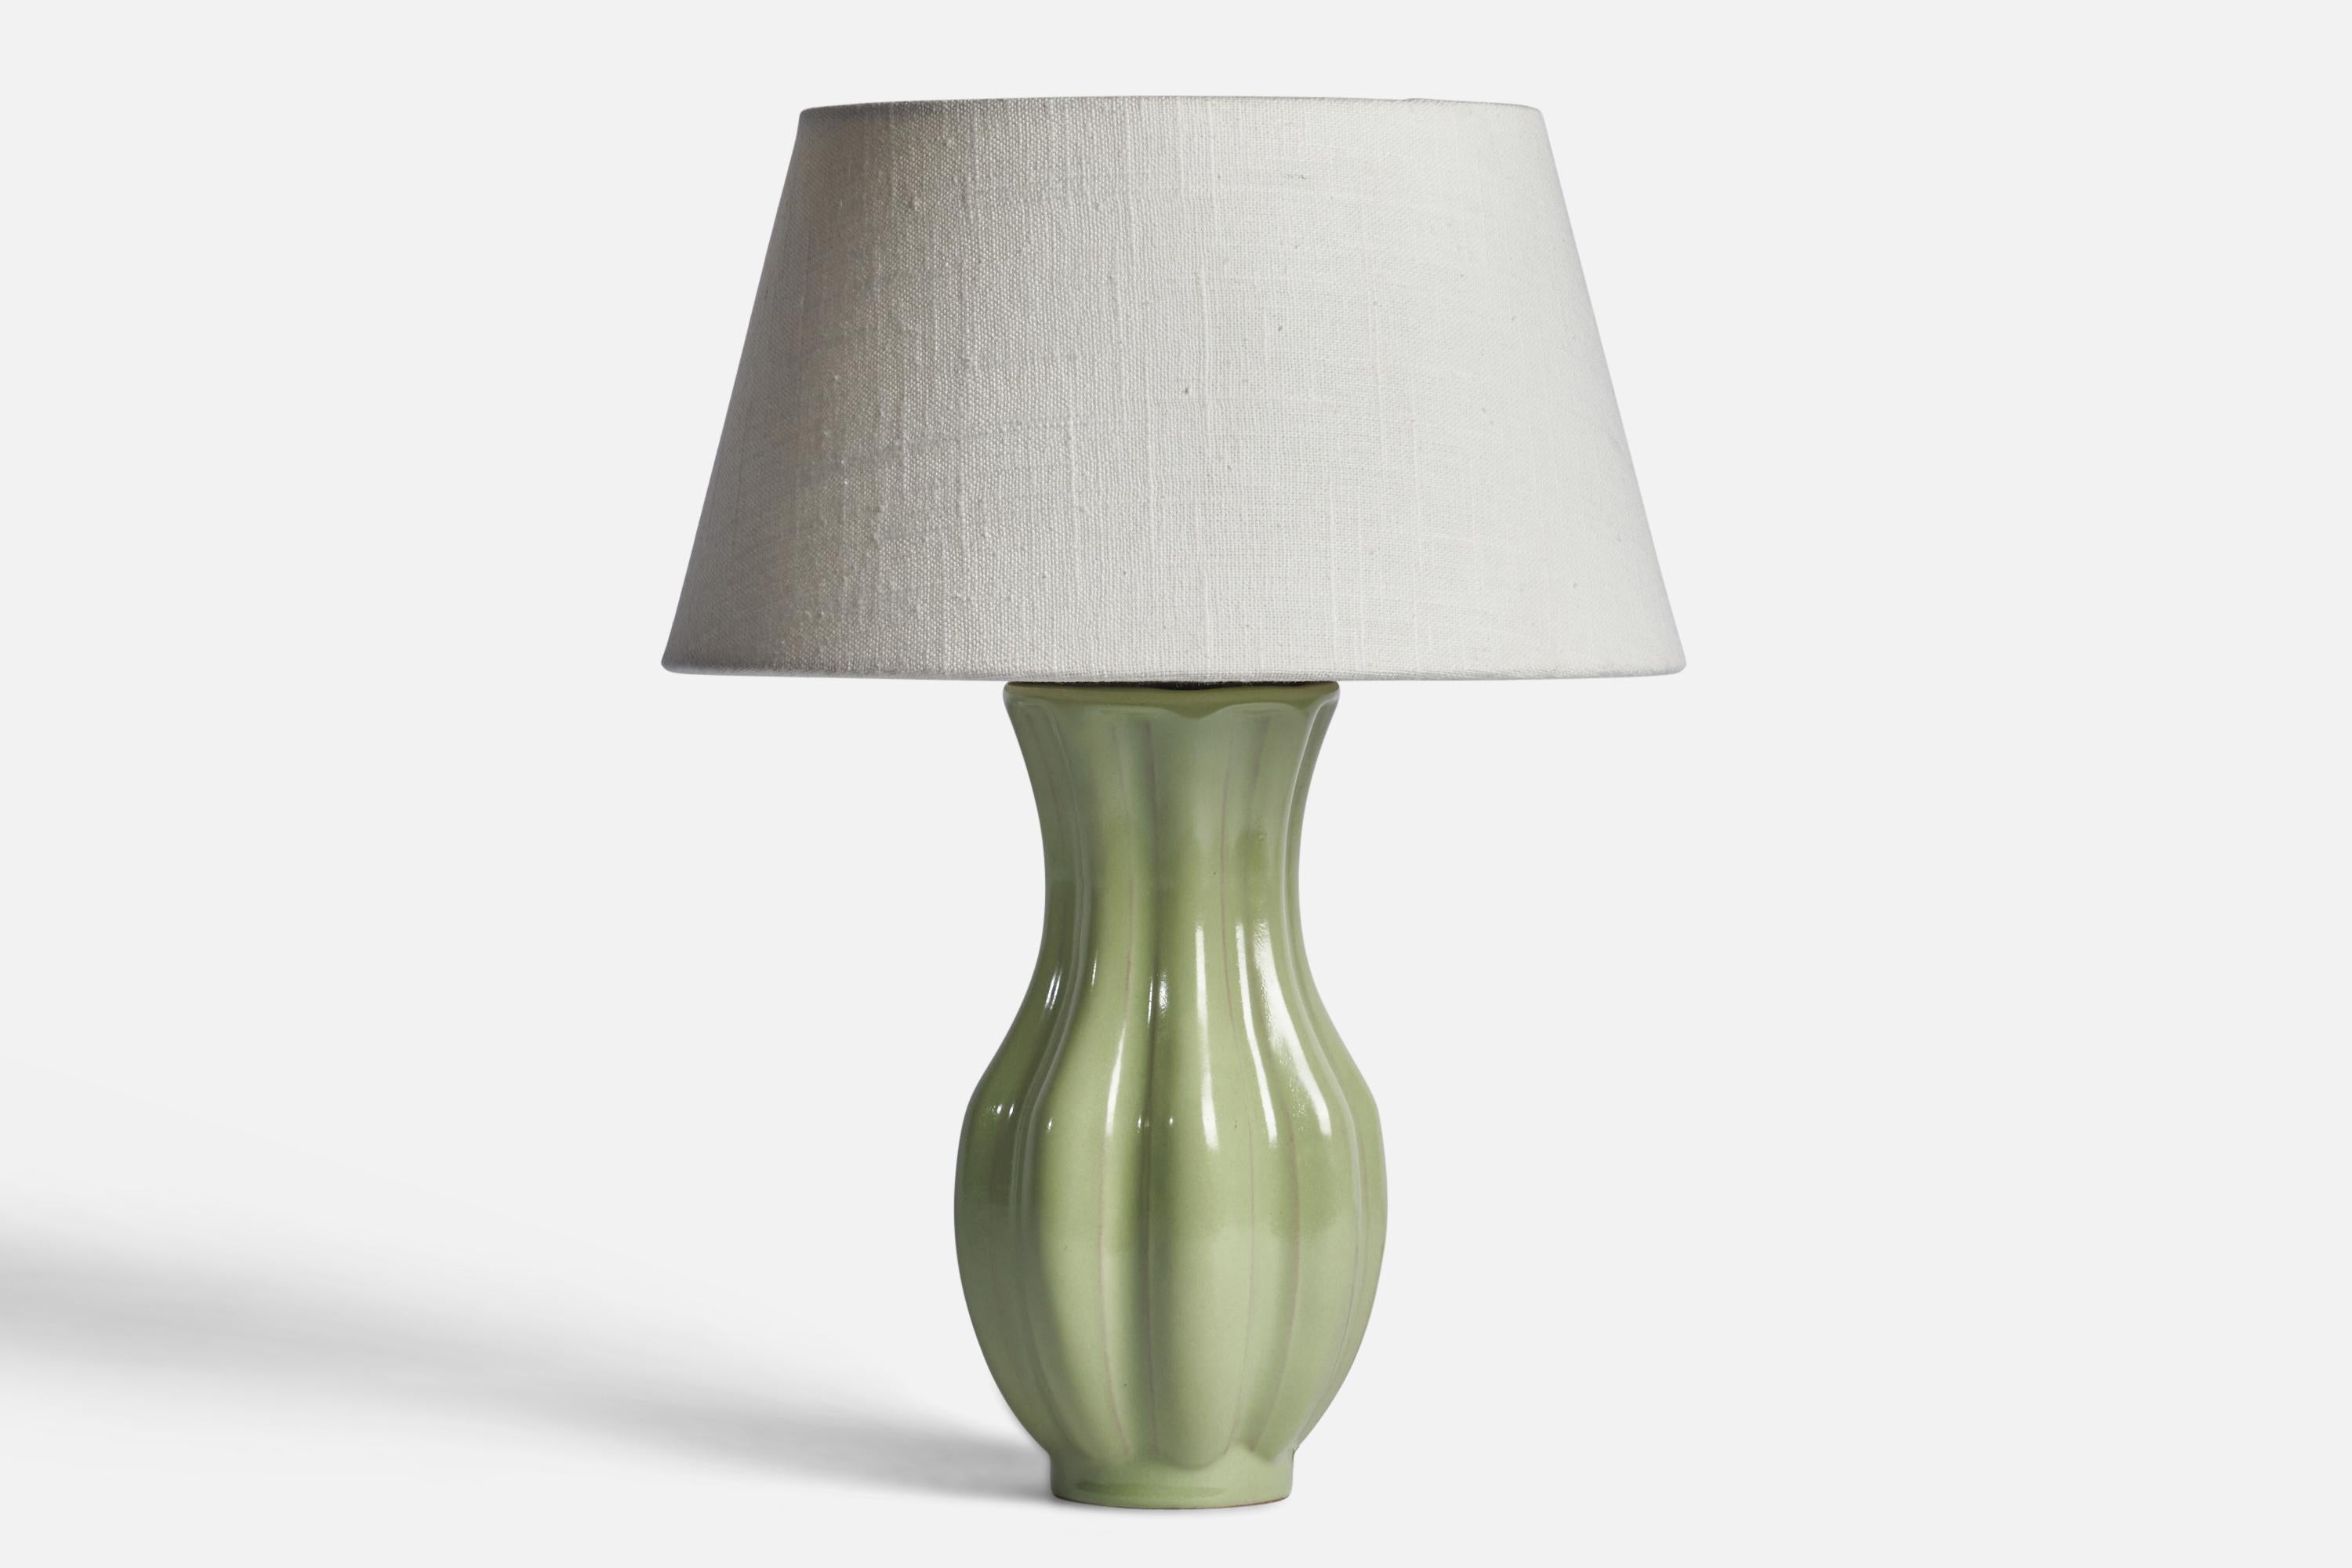 A green-glazed and fluted earthenware table lamp designed and produced by Upsala Ekeby, Sweden, 1930s.

Dimensions of Lamp (inches): 10.25